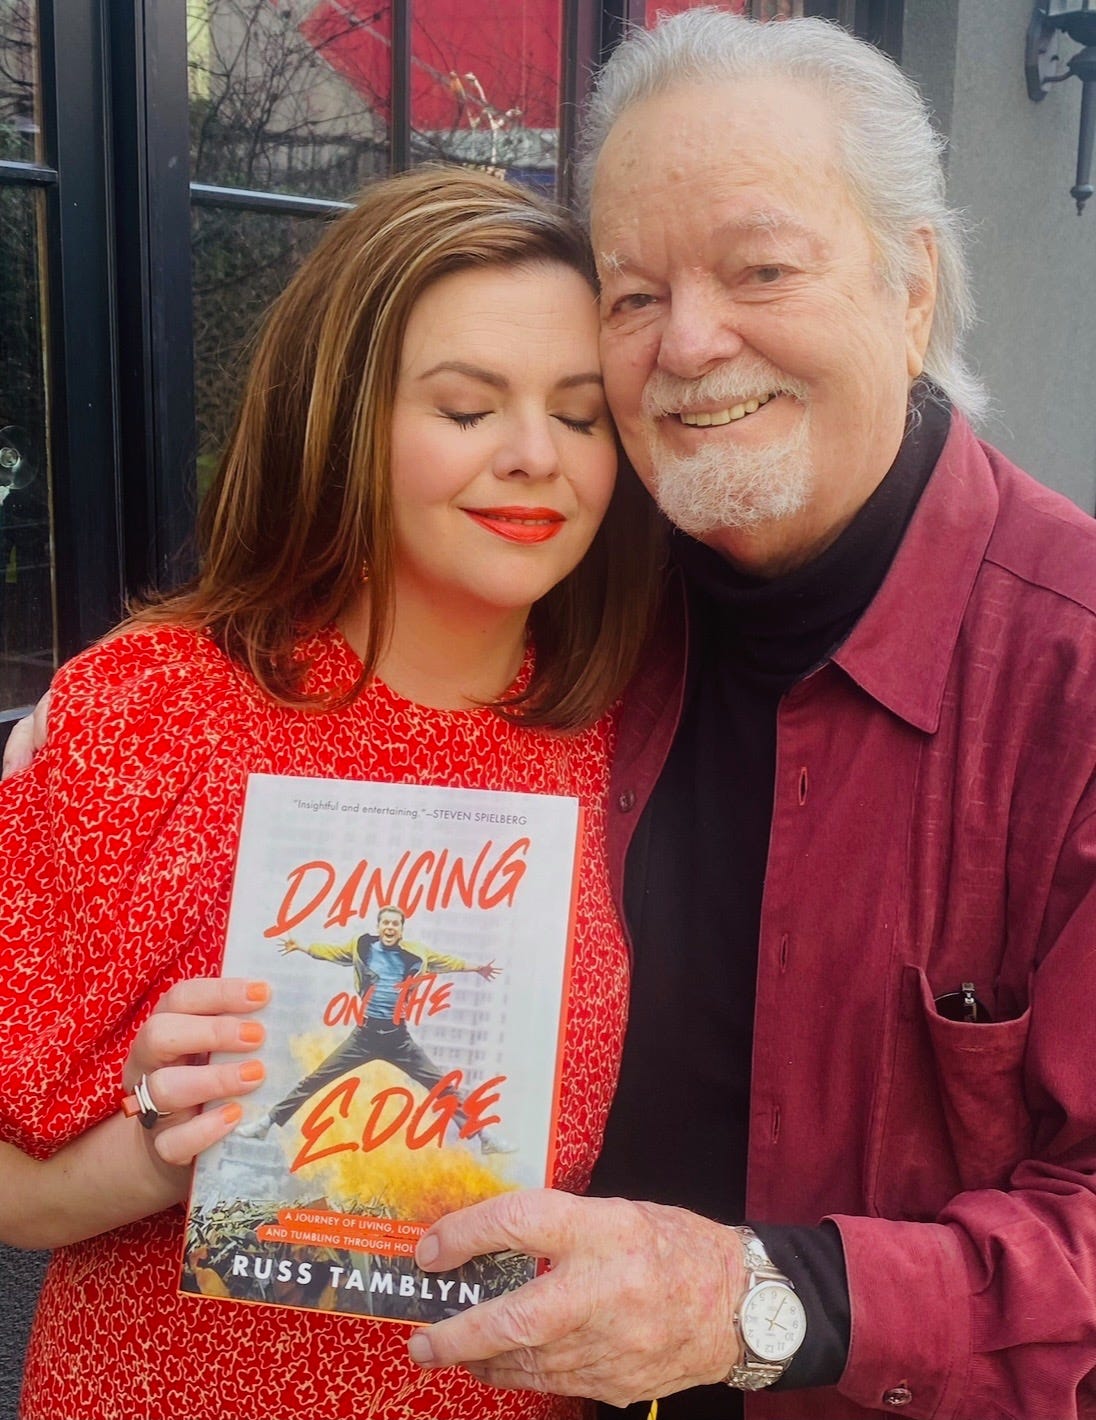 Amber and Russ Tamblyn hold Russ' memoir, "Dancing on the Edge." Russ smiles into the camera. Amber has her eyes closed and a soft smile with the head pressed against her dad's cheek.